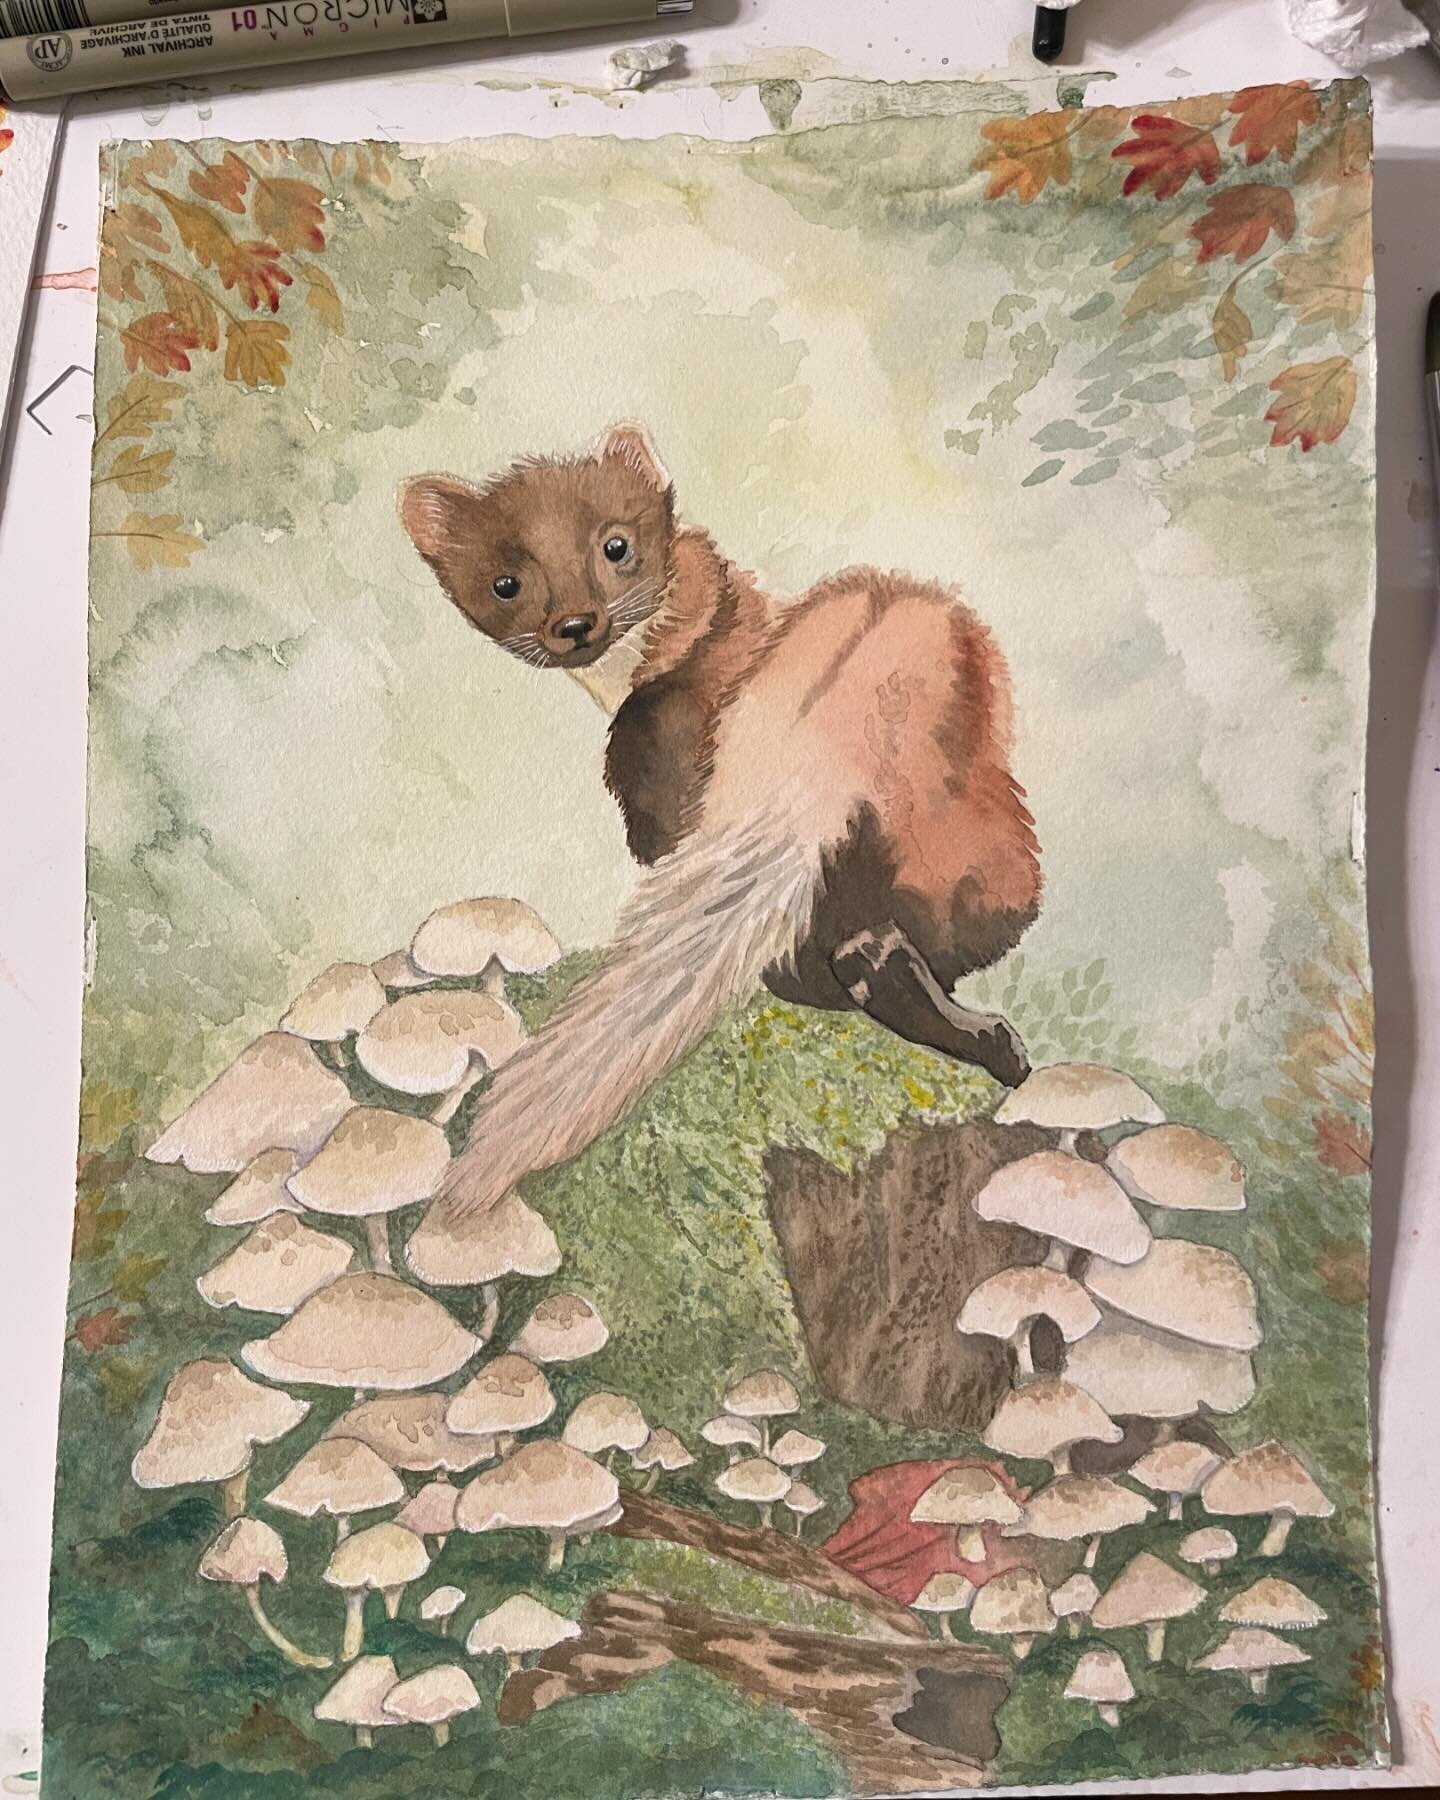 A new little pine martin made his appearance today! #ampainting #pinemartin #intheforest #watercolorillustration